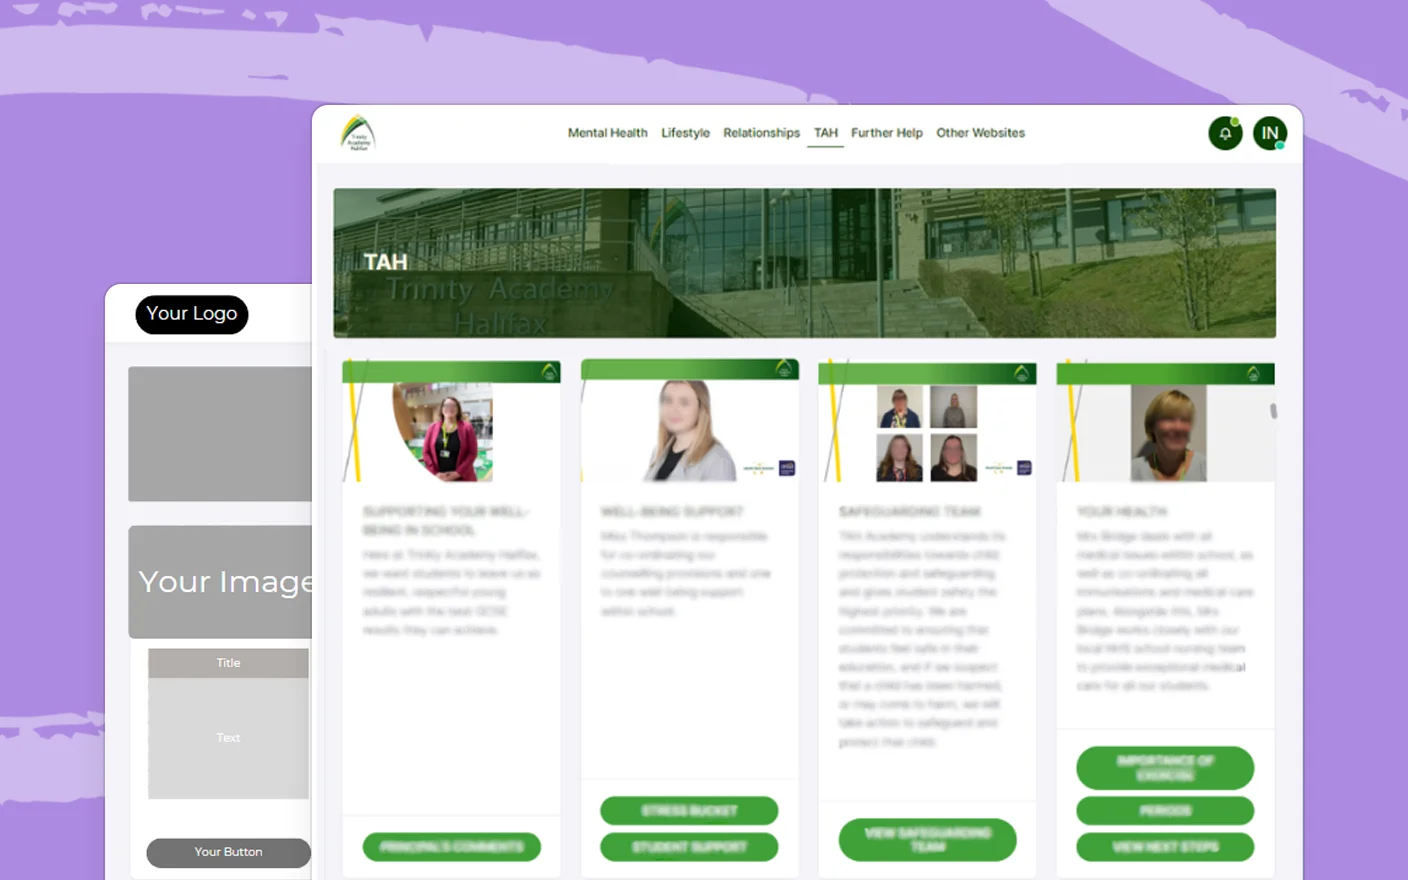 Customisable web page template for schools showing a placeholder for a logo, images, and content, emphasizing the ability to tailor branding and information.